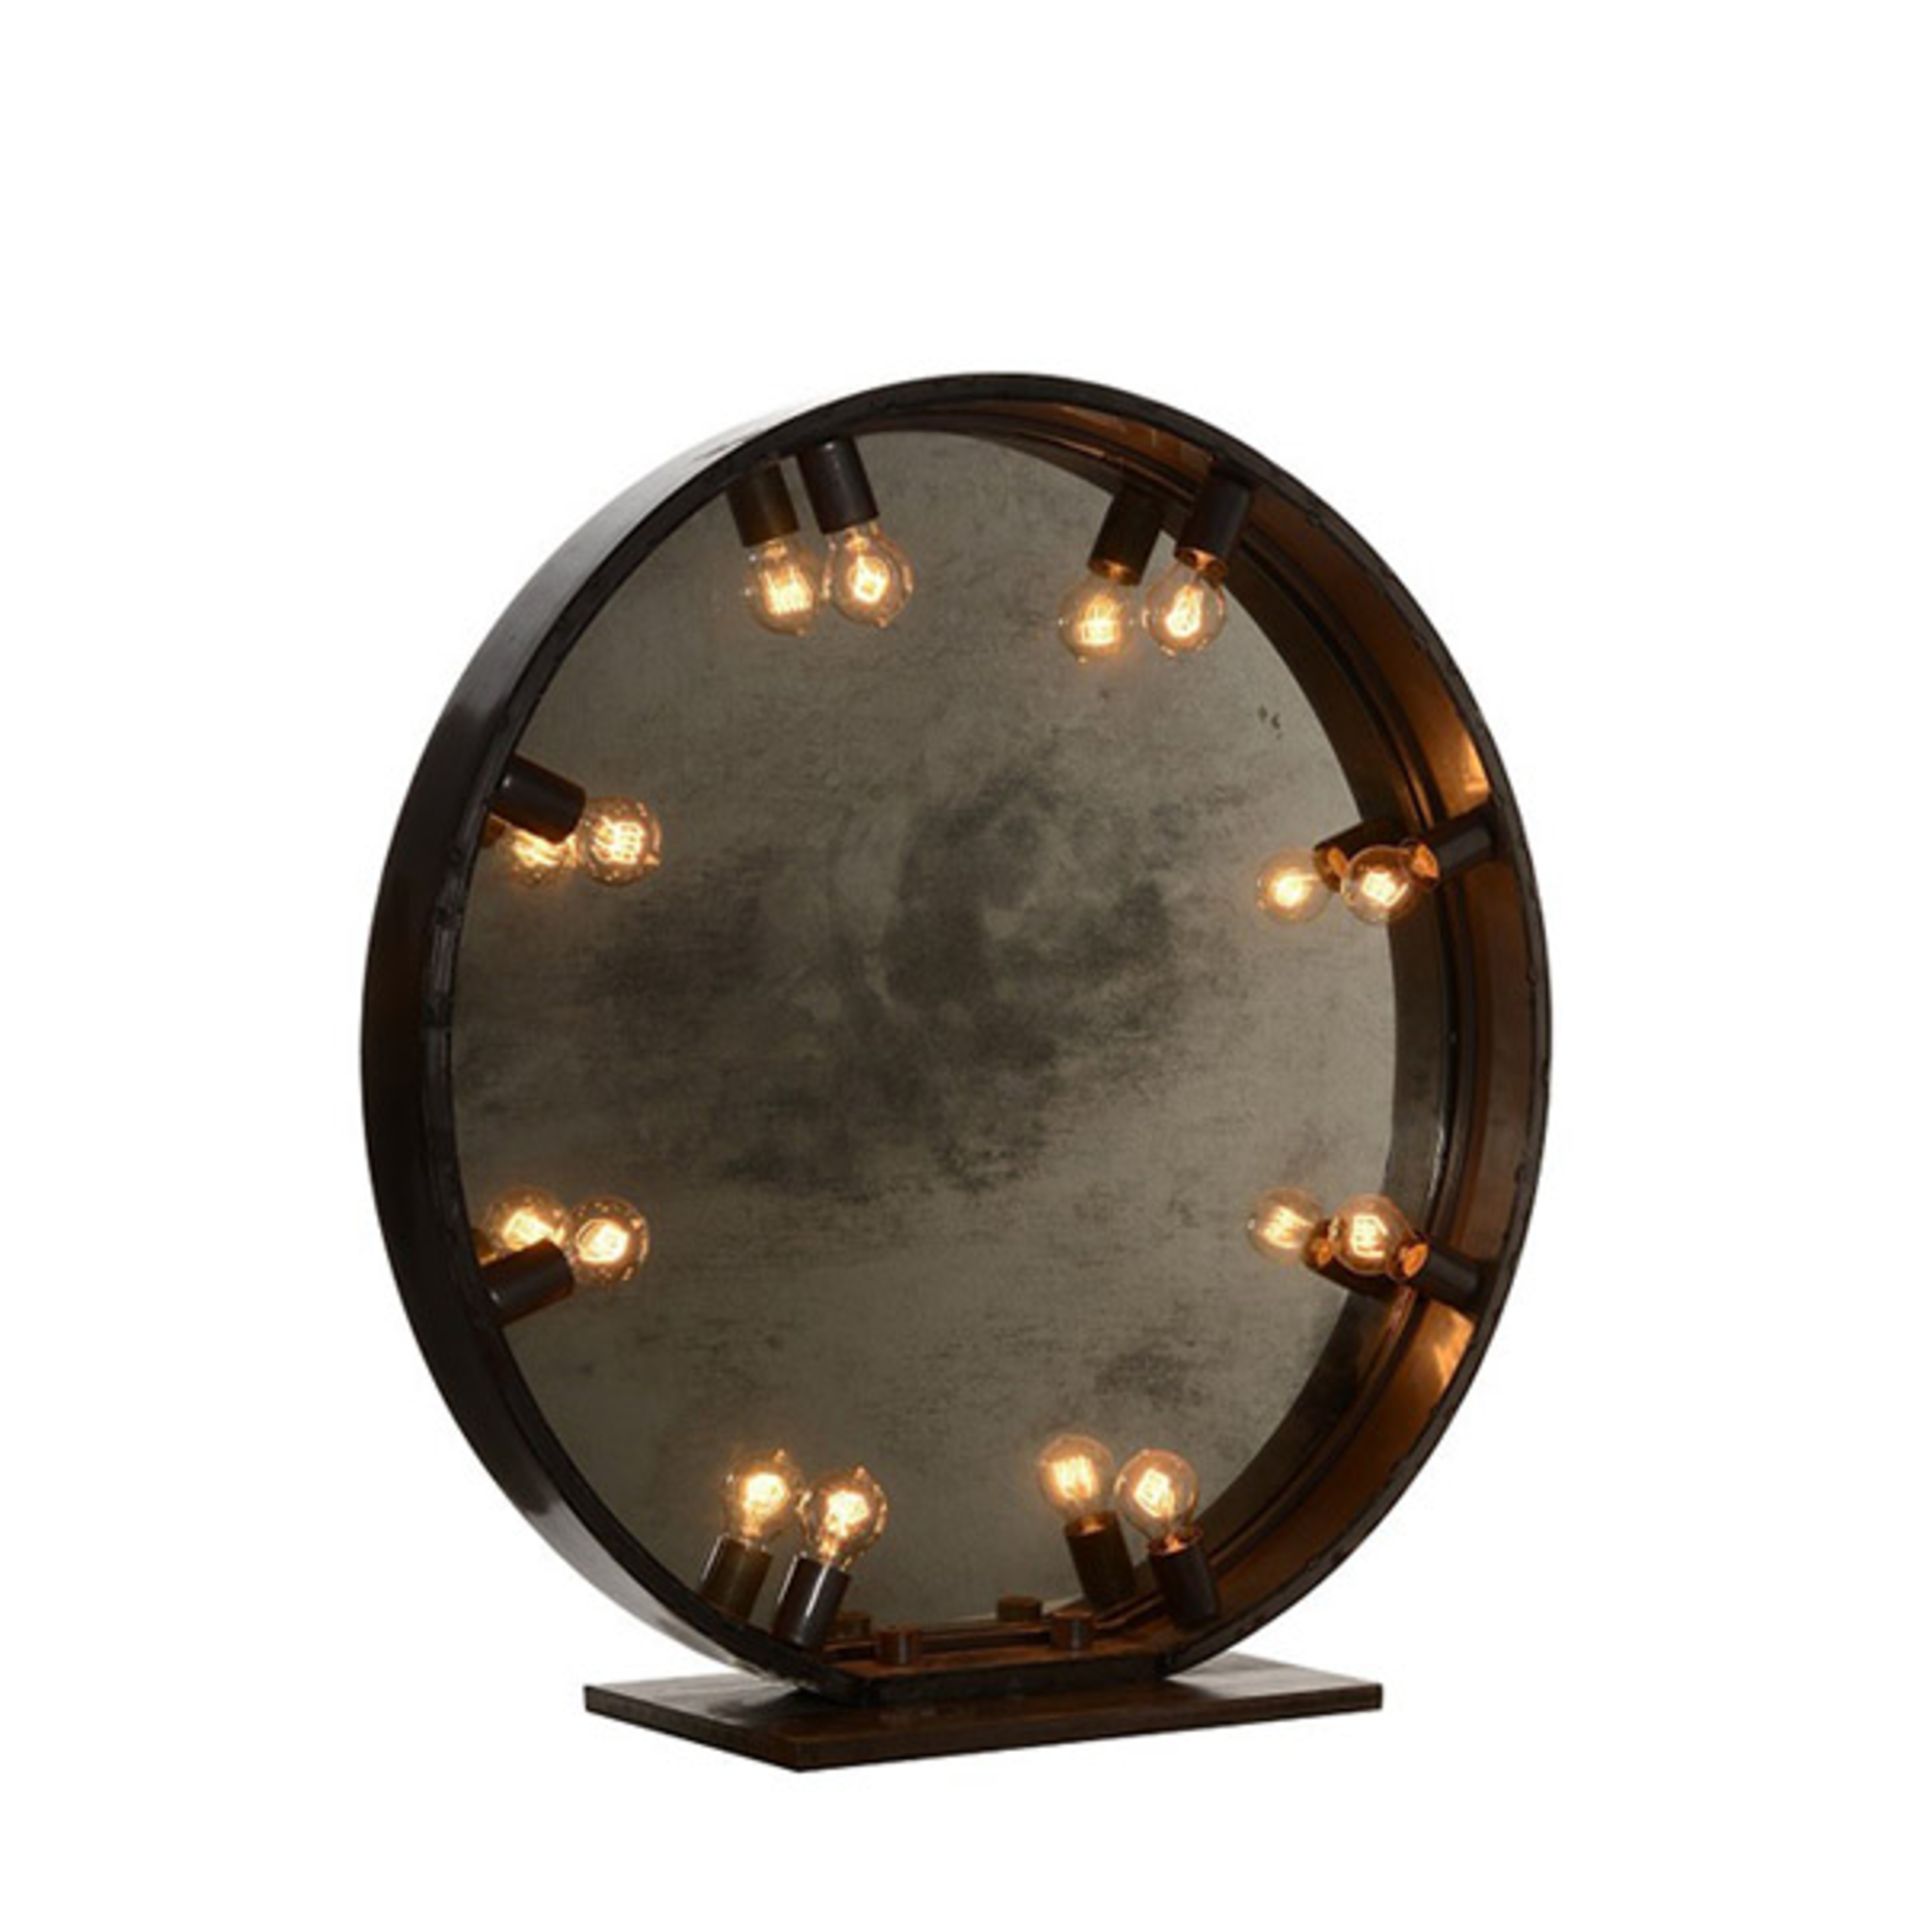 Starlet Mirror Large Floor Lamp-Natural 140 X 30 X 148cm - Image 4 of 4